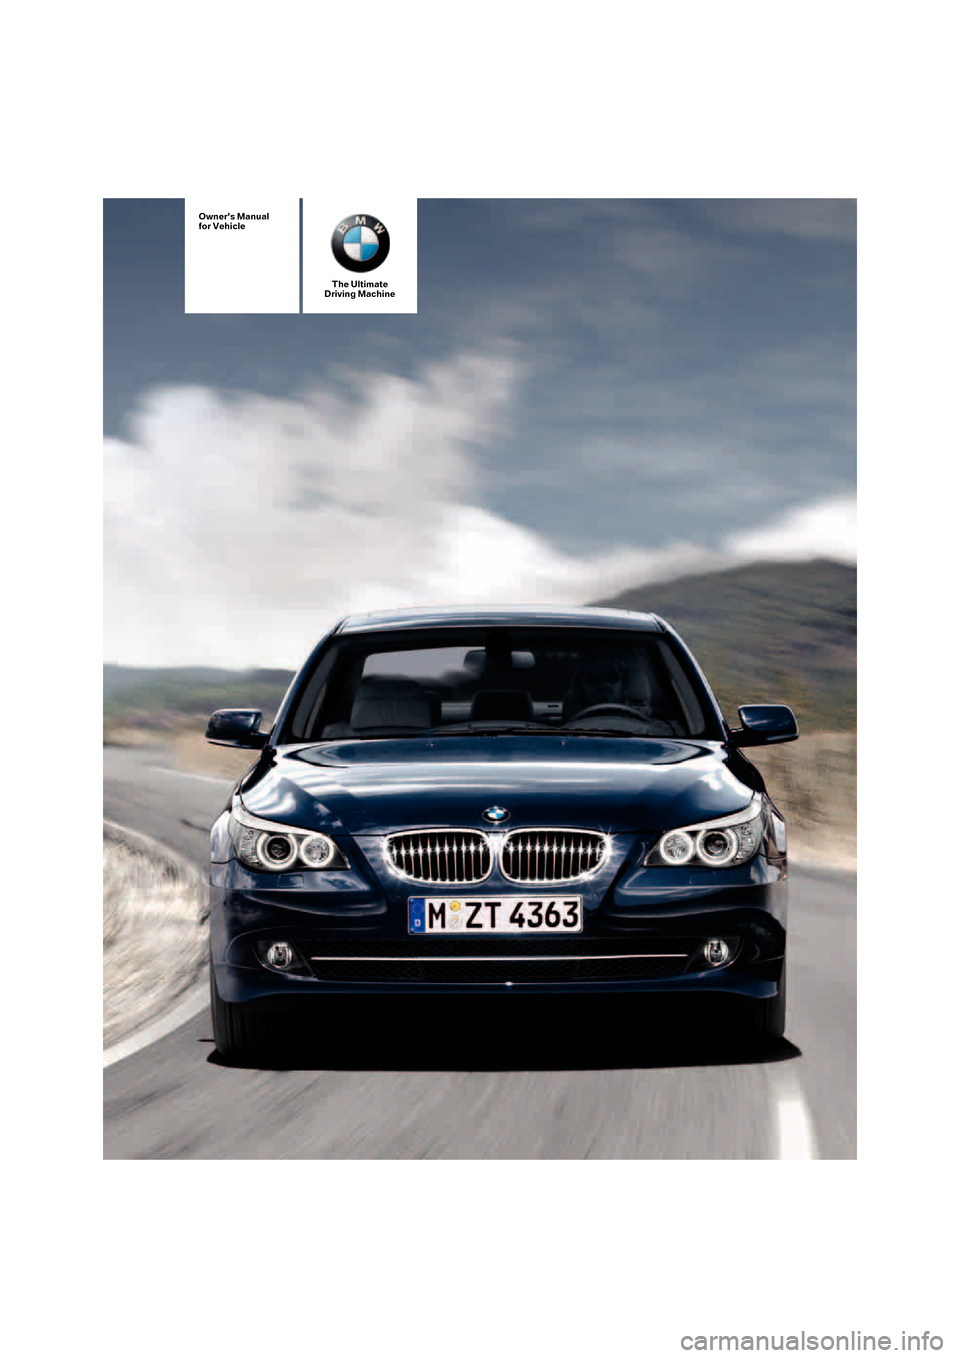 BMW 525I TOURING 2007 E61 Owners Manual The Ultimate
Driving Machine
Owners Manual
for Vehicle 